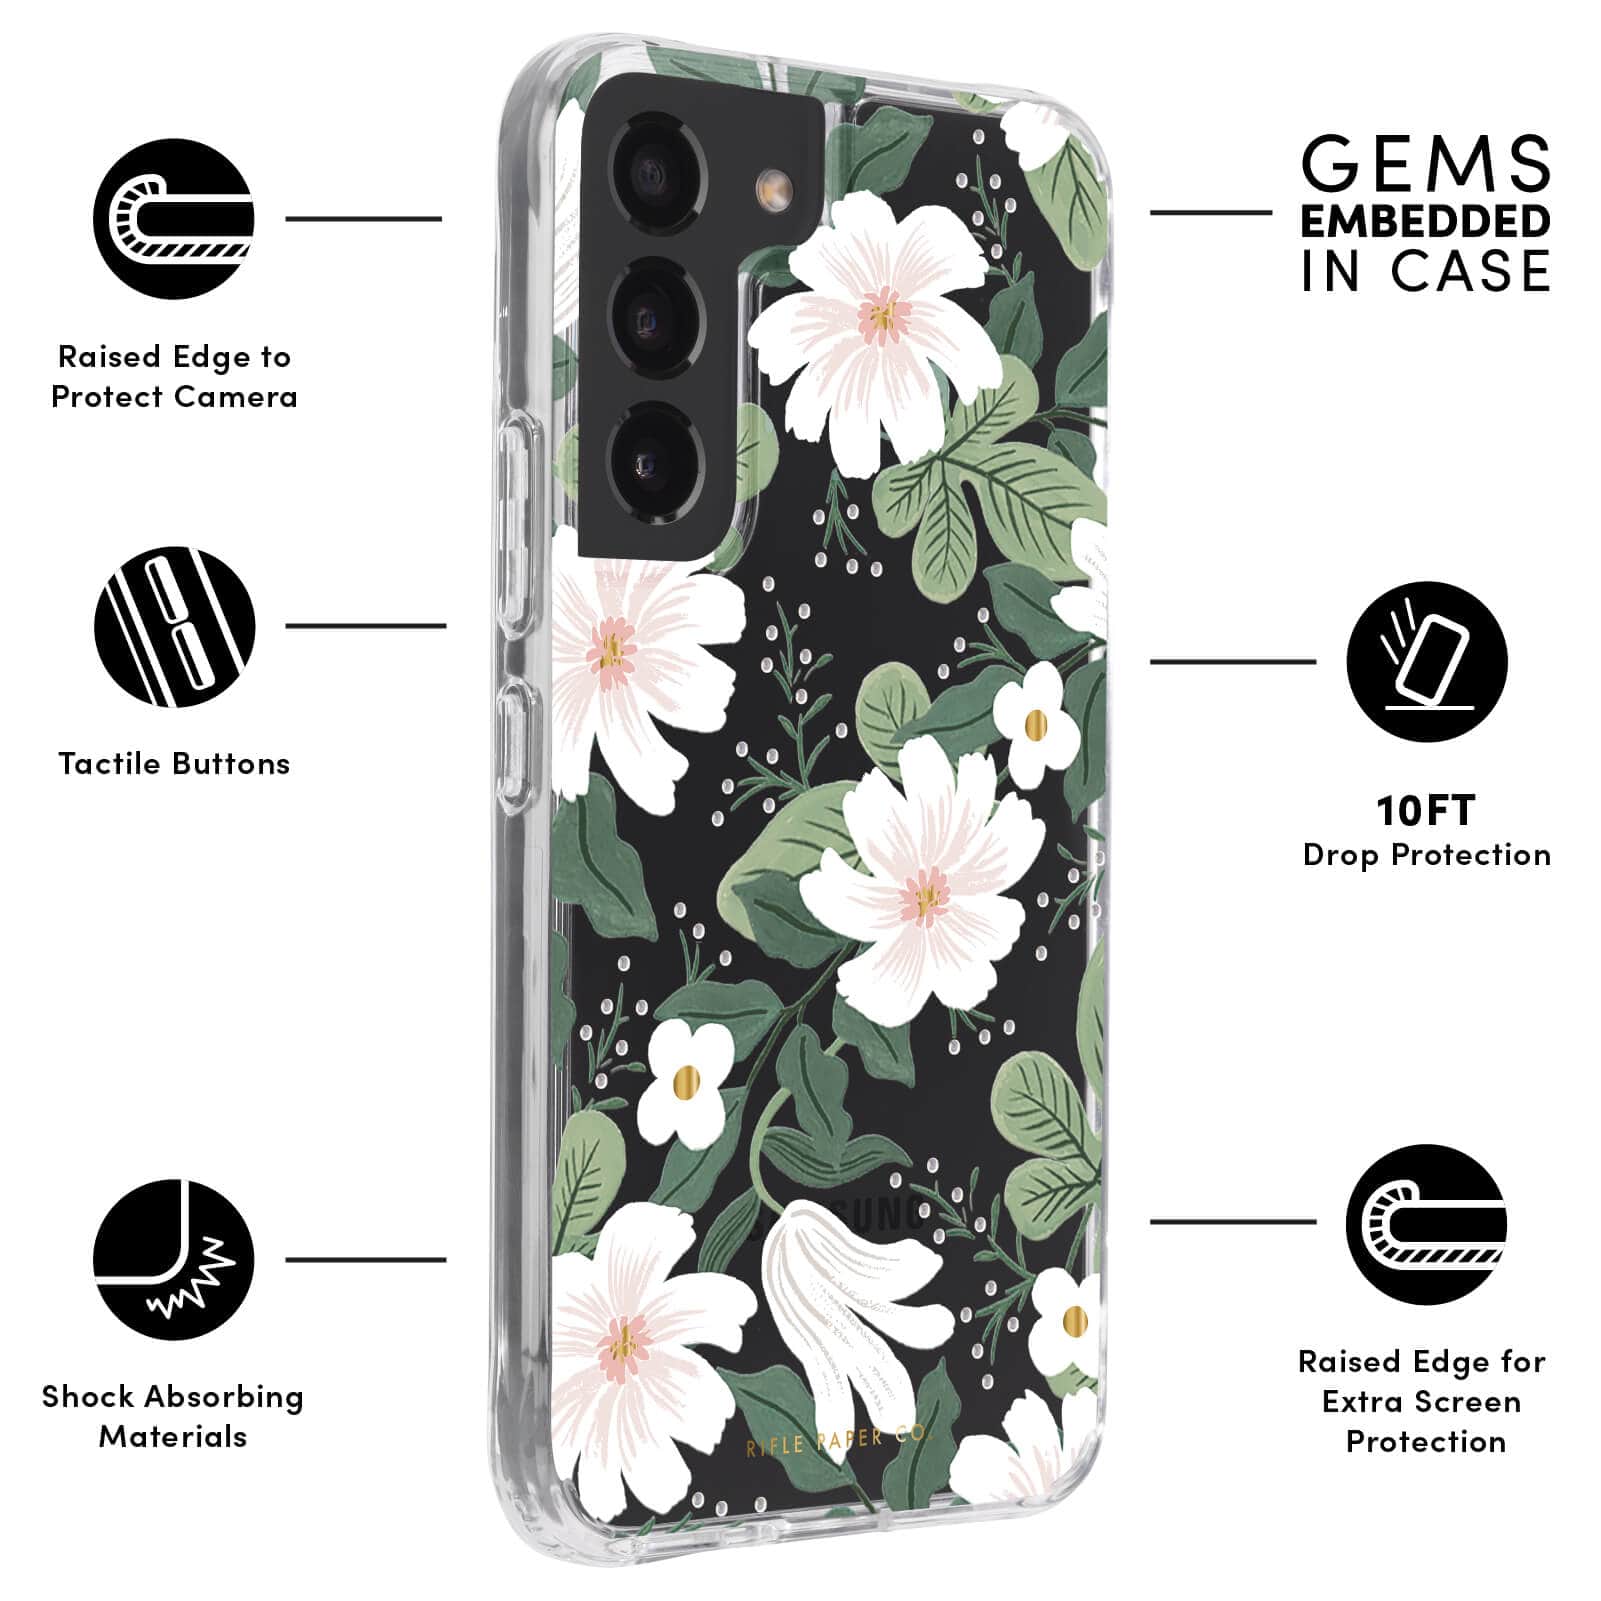 FEATURES: RAISED EDGE TO PROTECT CAMERA, TACTILE BUTTONS, SHOCK ABSORBING MATERIALS, GEMS EMBEDDED IN CASE, 10 FT DROP PROTECTION, RAISED EDGE FOR EXTRA SCREEN PROTECTION. COLOR::WILLOW